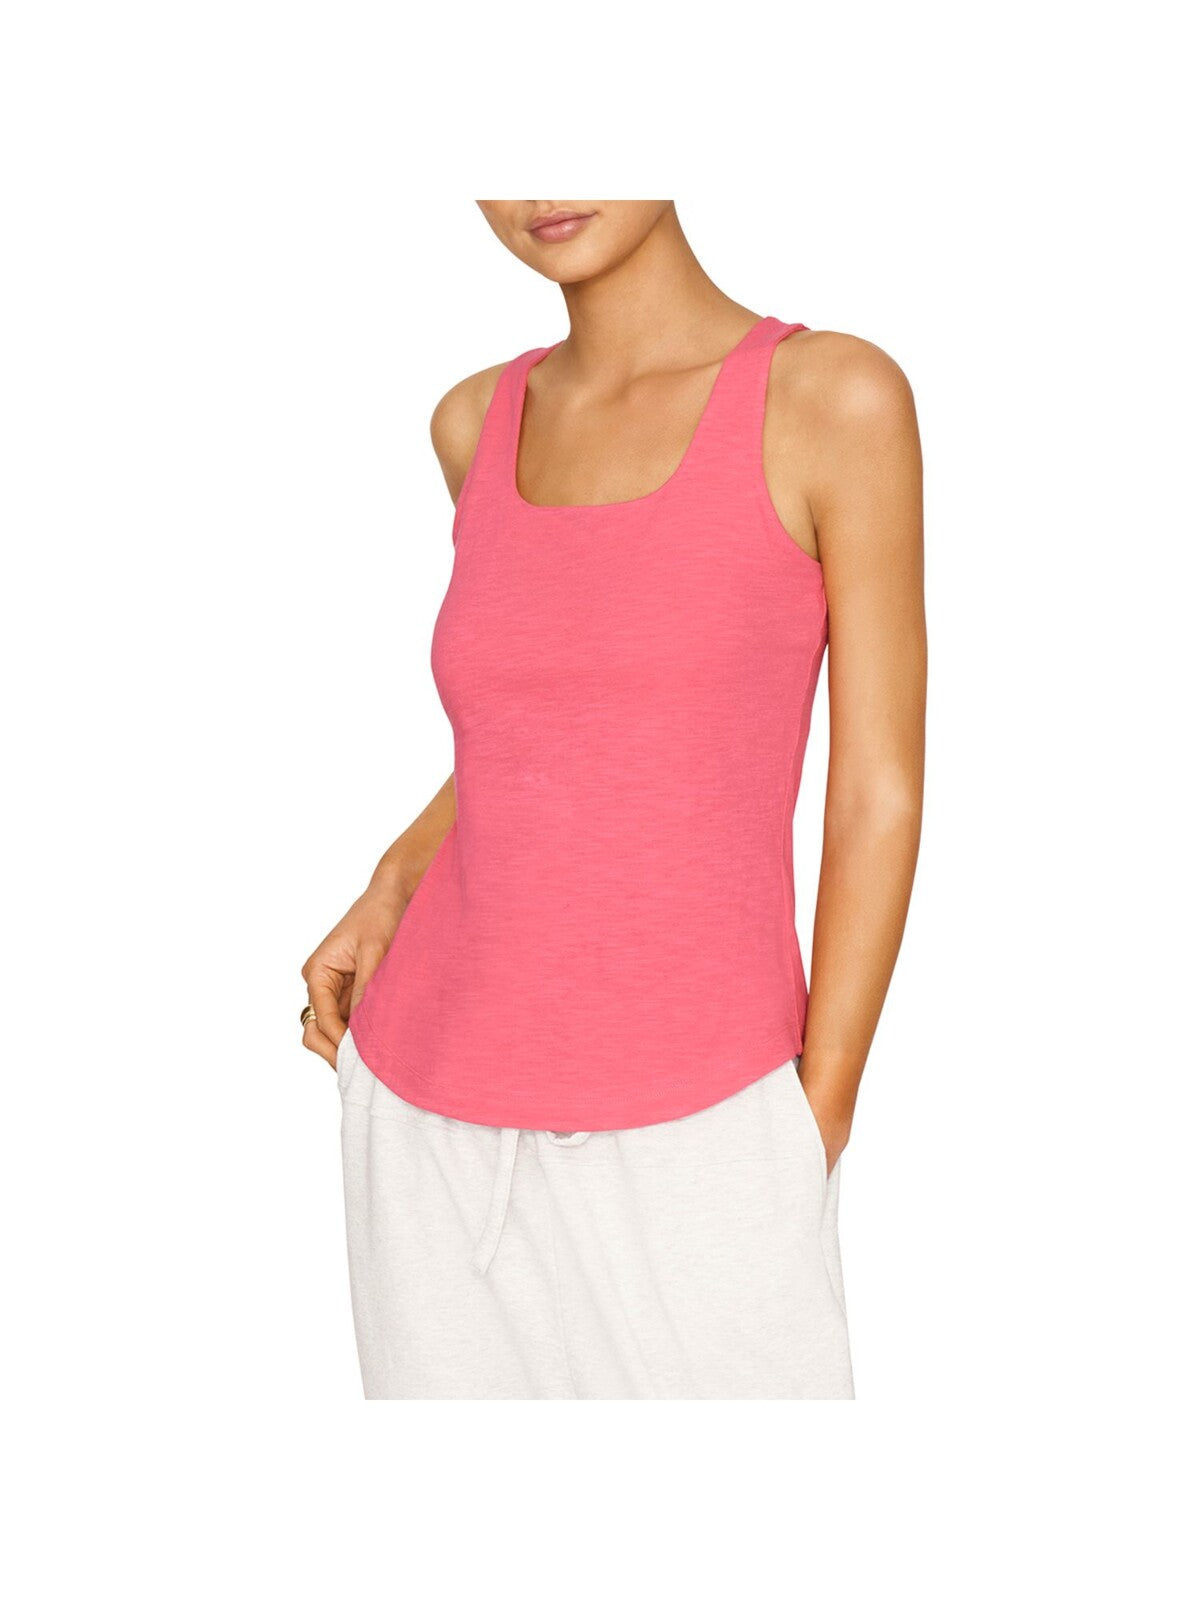 B NEW YORK Womens Pink Stretch Fitted Built-in Shelf Bra Sleeveless Square Neck Tank Top S